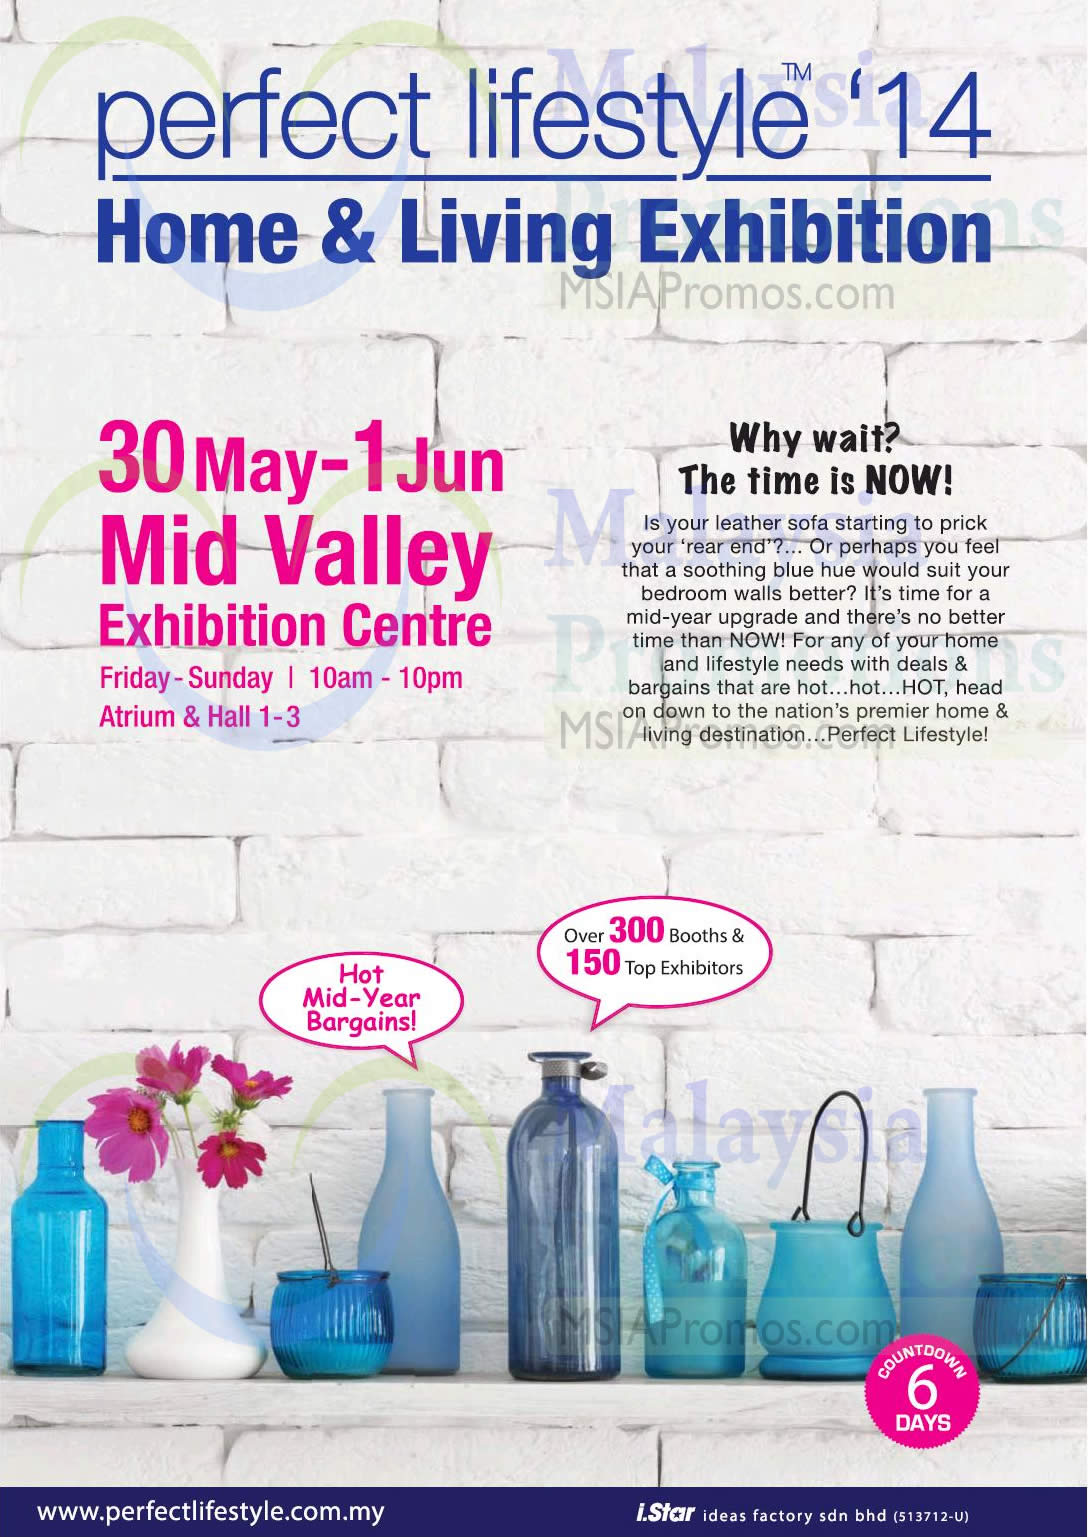 Featured image for Perfect Lifestyle @ Mid Valley Exhibition Centre 30 May - 1 Jun 2014